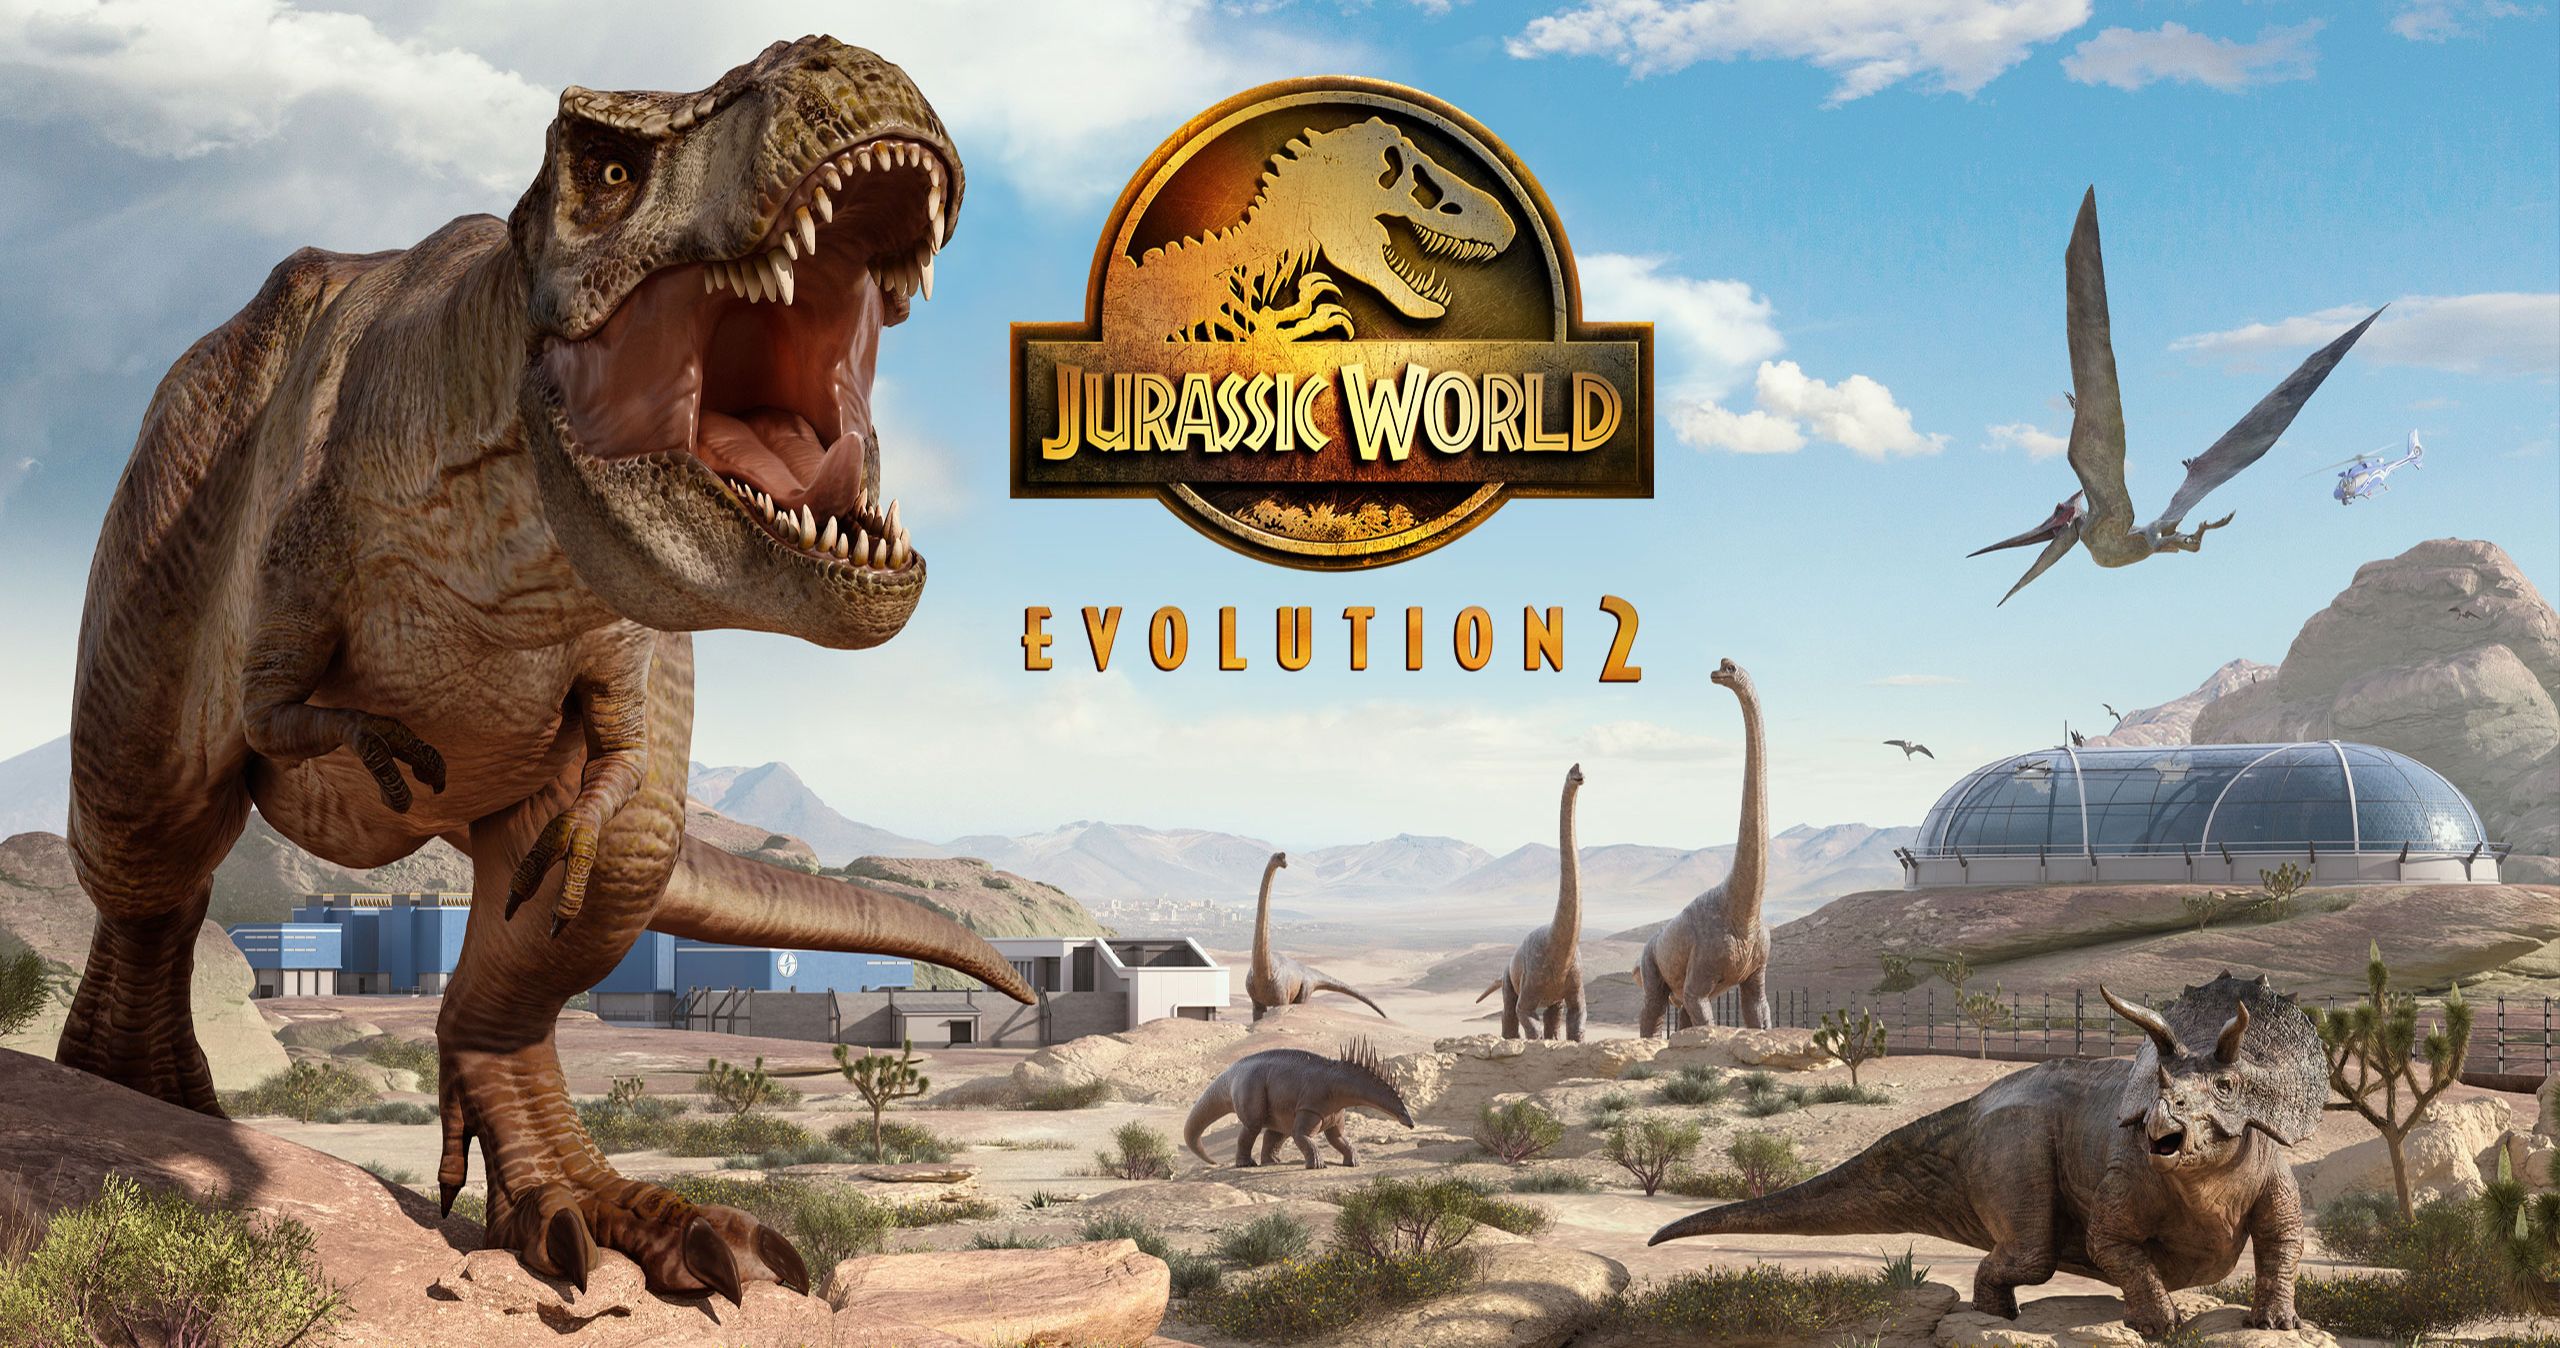 Jurassic World Evolution 2 Game Trailer Arrives, a Very Different World Is Coming in 2021